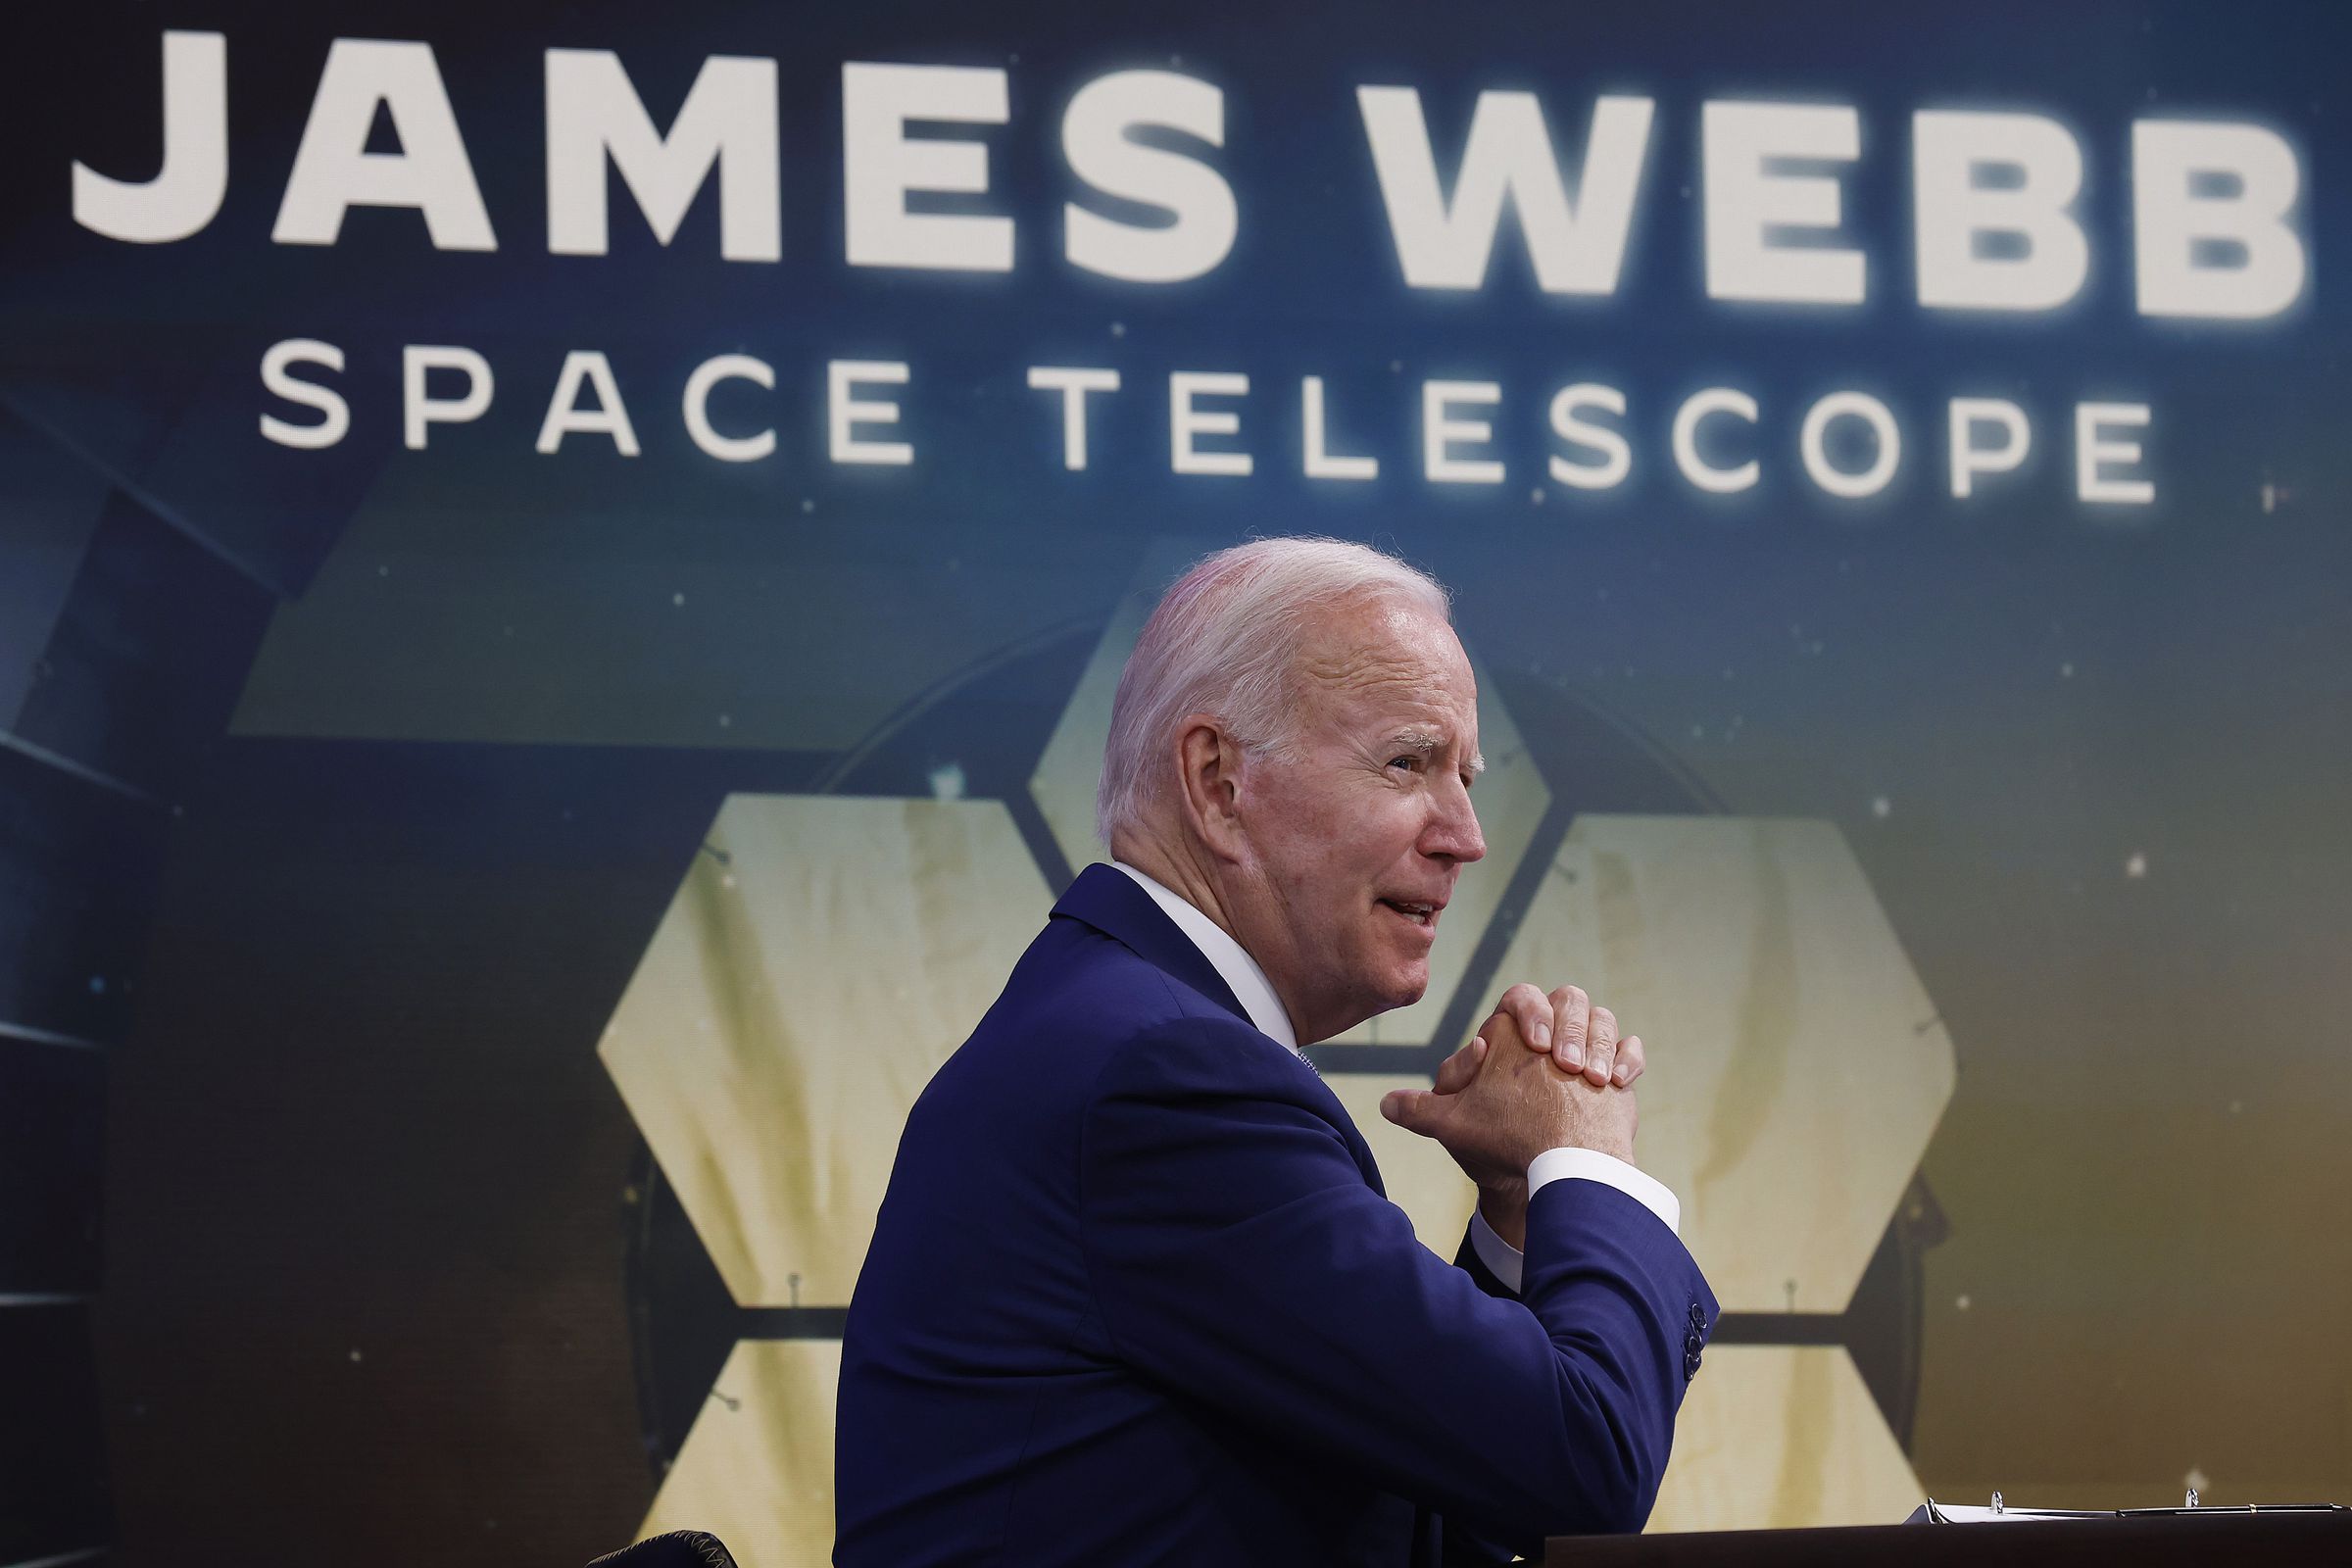 President Biden Previews First Images From Webb Space Telescope